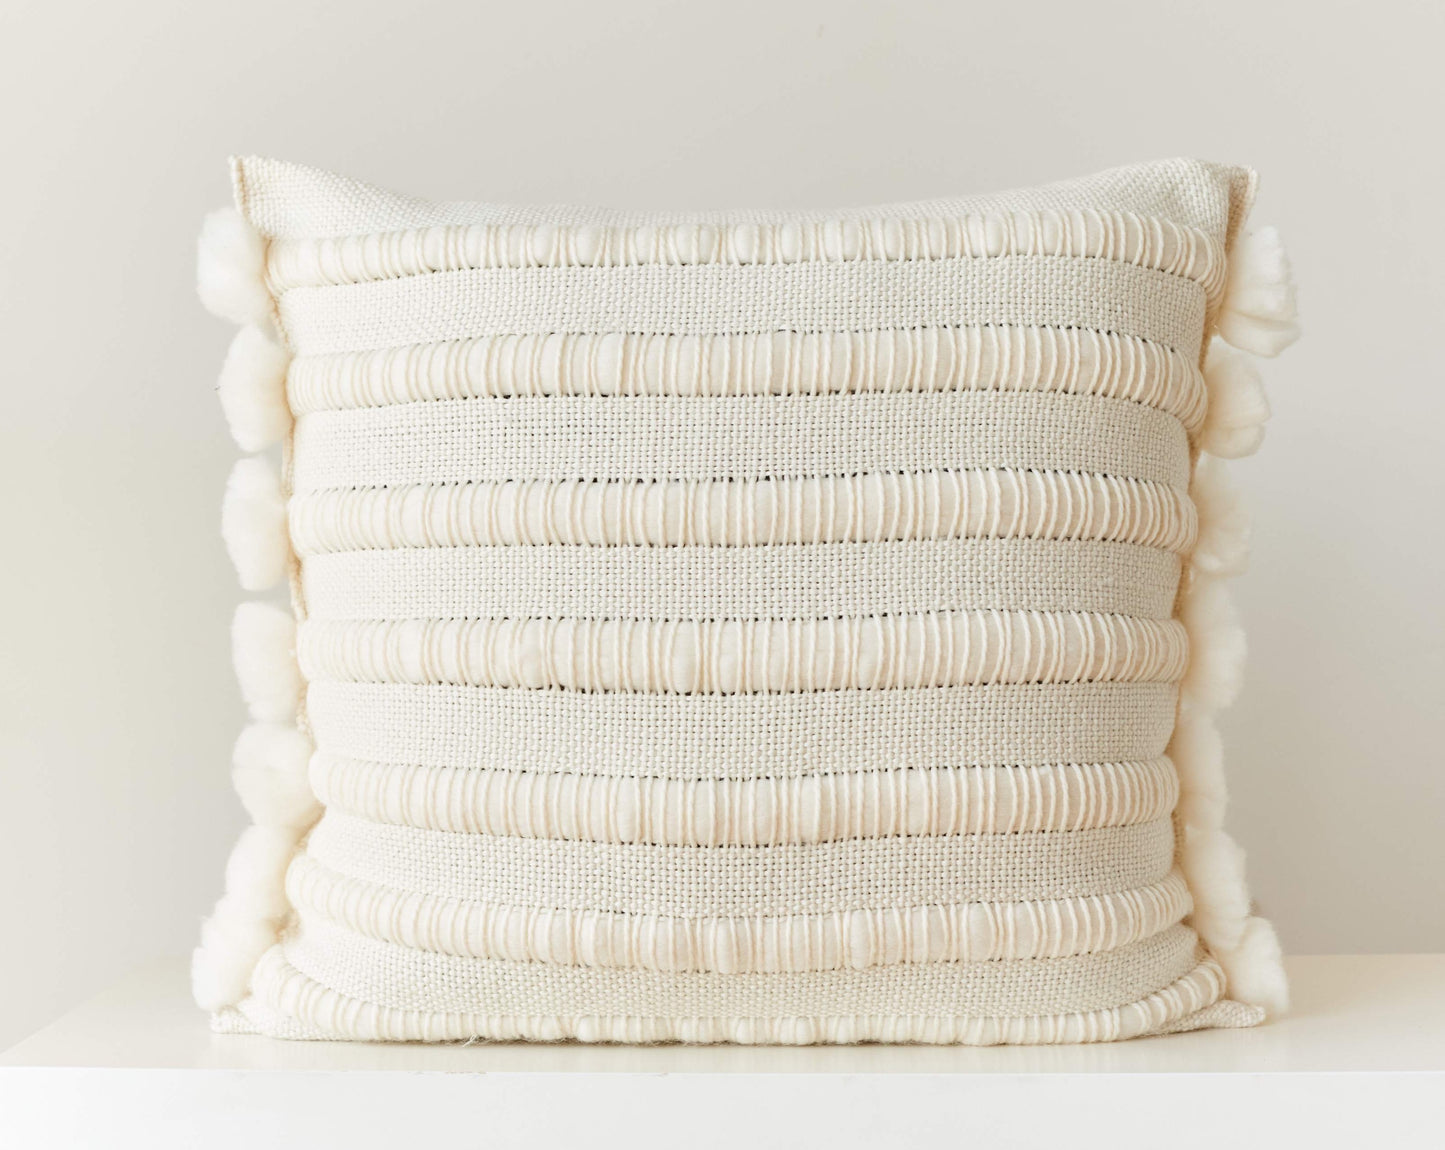 Throw pillow cover hand weaving with chunky stripes and pom poms in natural merino wool